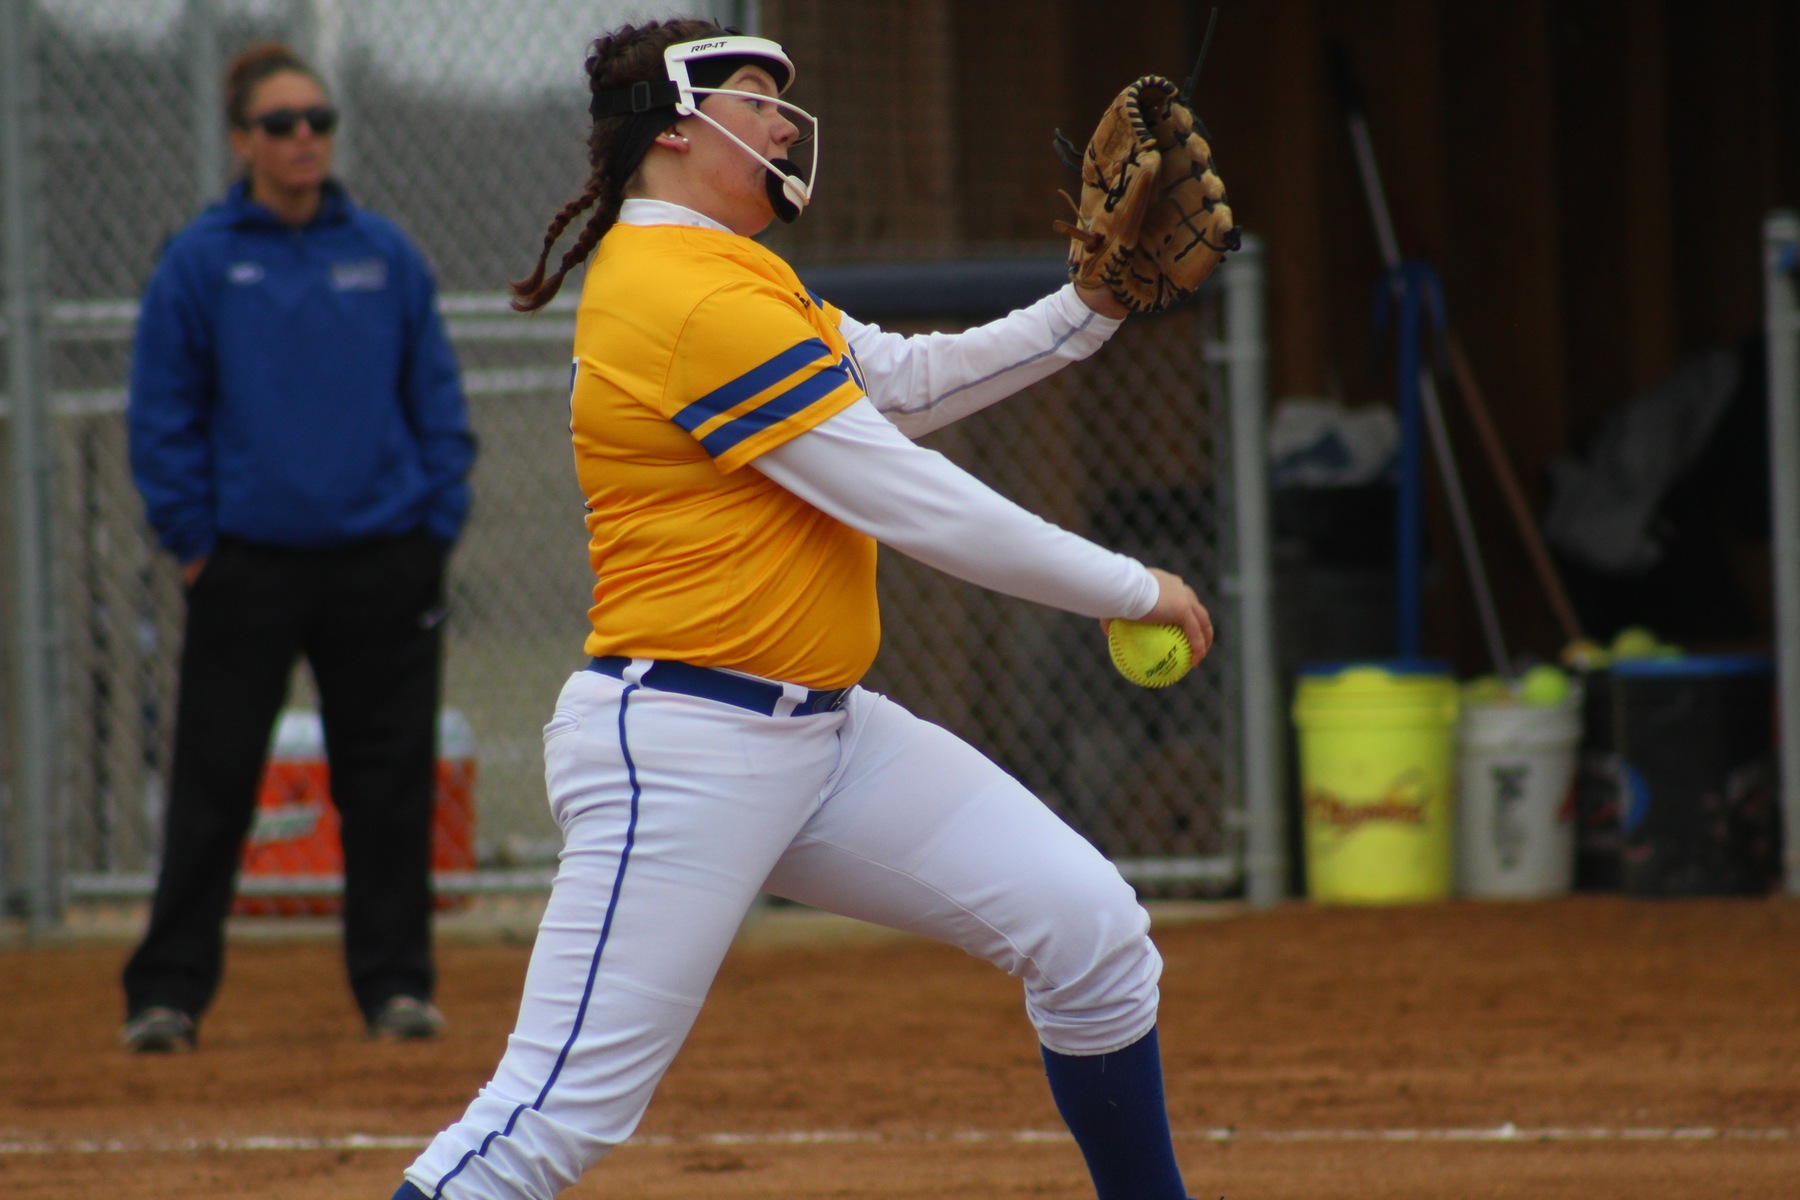 NIACC freshman Courtney Johannes throws delivers a pitch in Monday's doubleheader against DMACC.